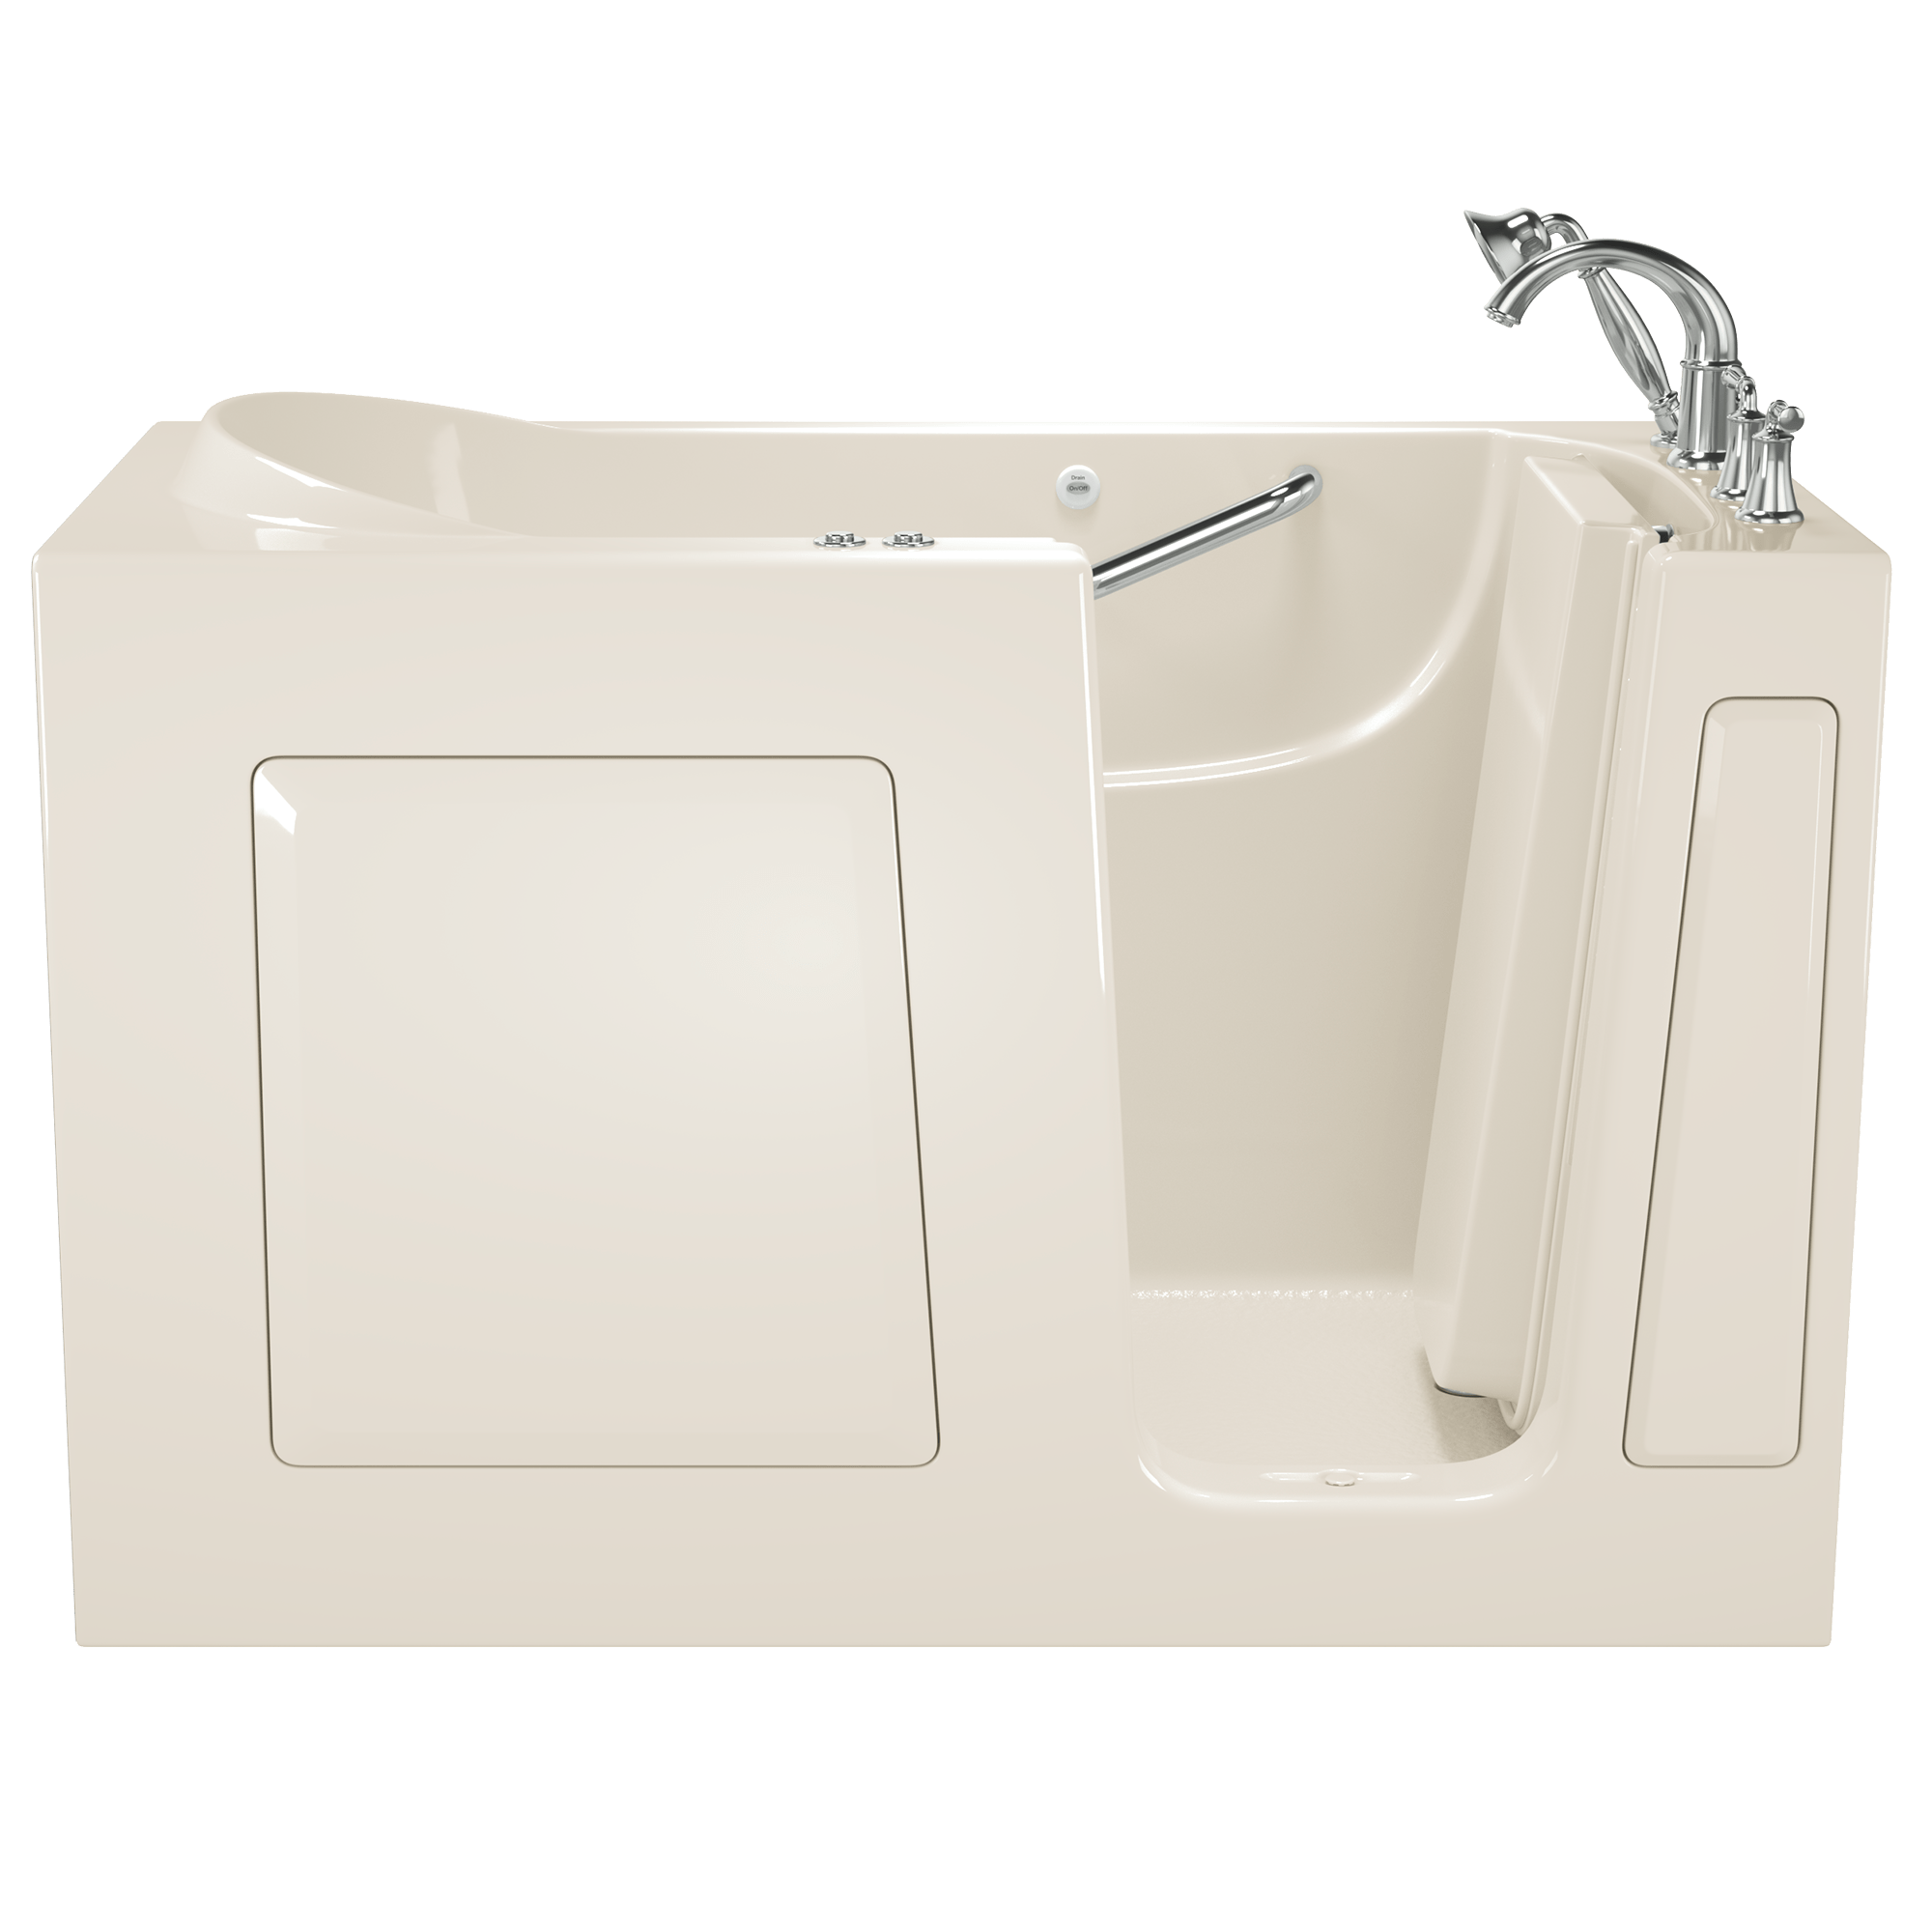 Gelcoat Value Series 60x30-Inch Walk-In Bathtub with Combination Whirlpool and Air Spa System - Right Hand Door and Drain